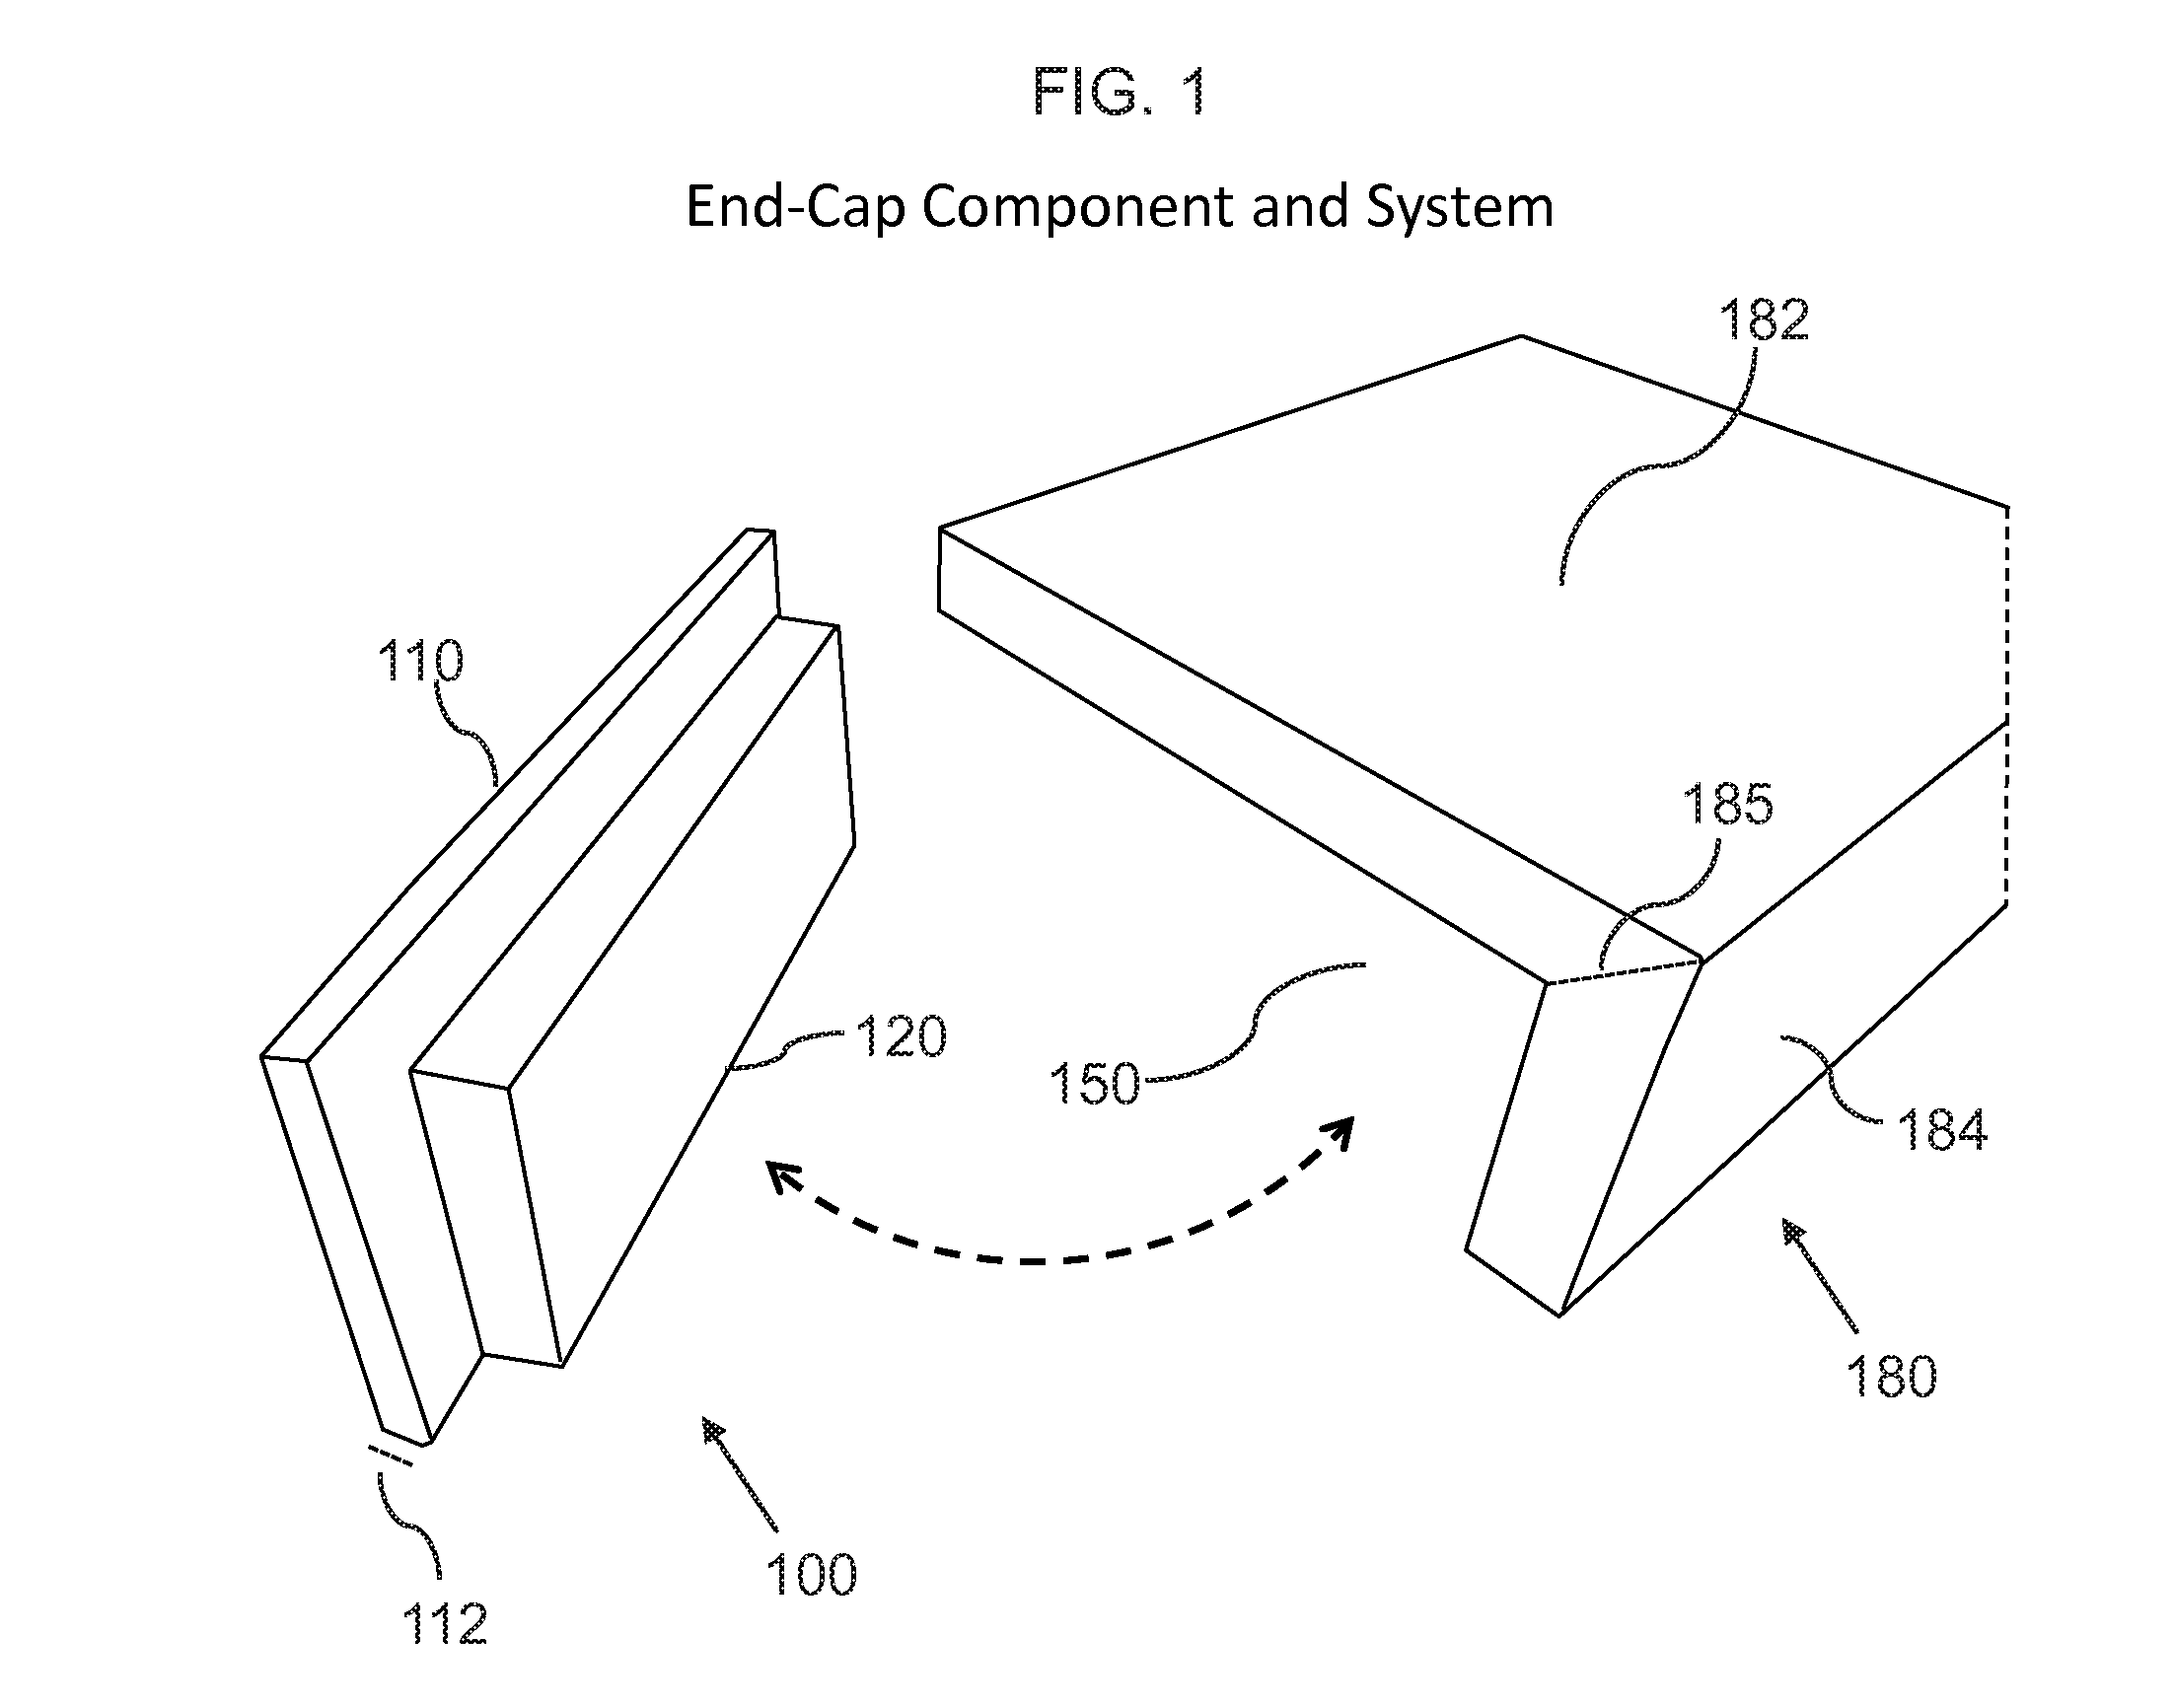 End-cap system and device for use with countertops